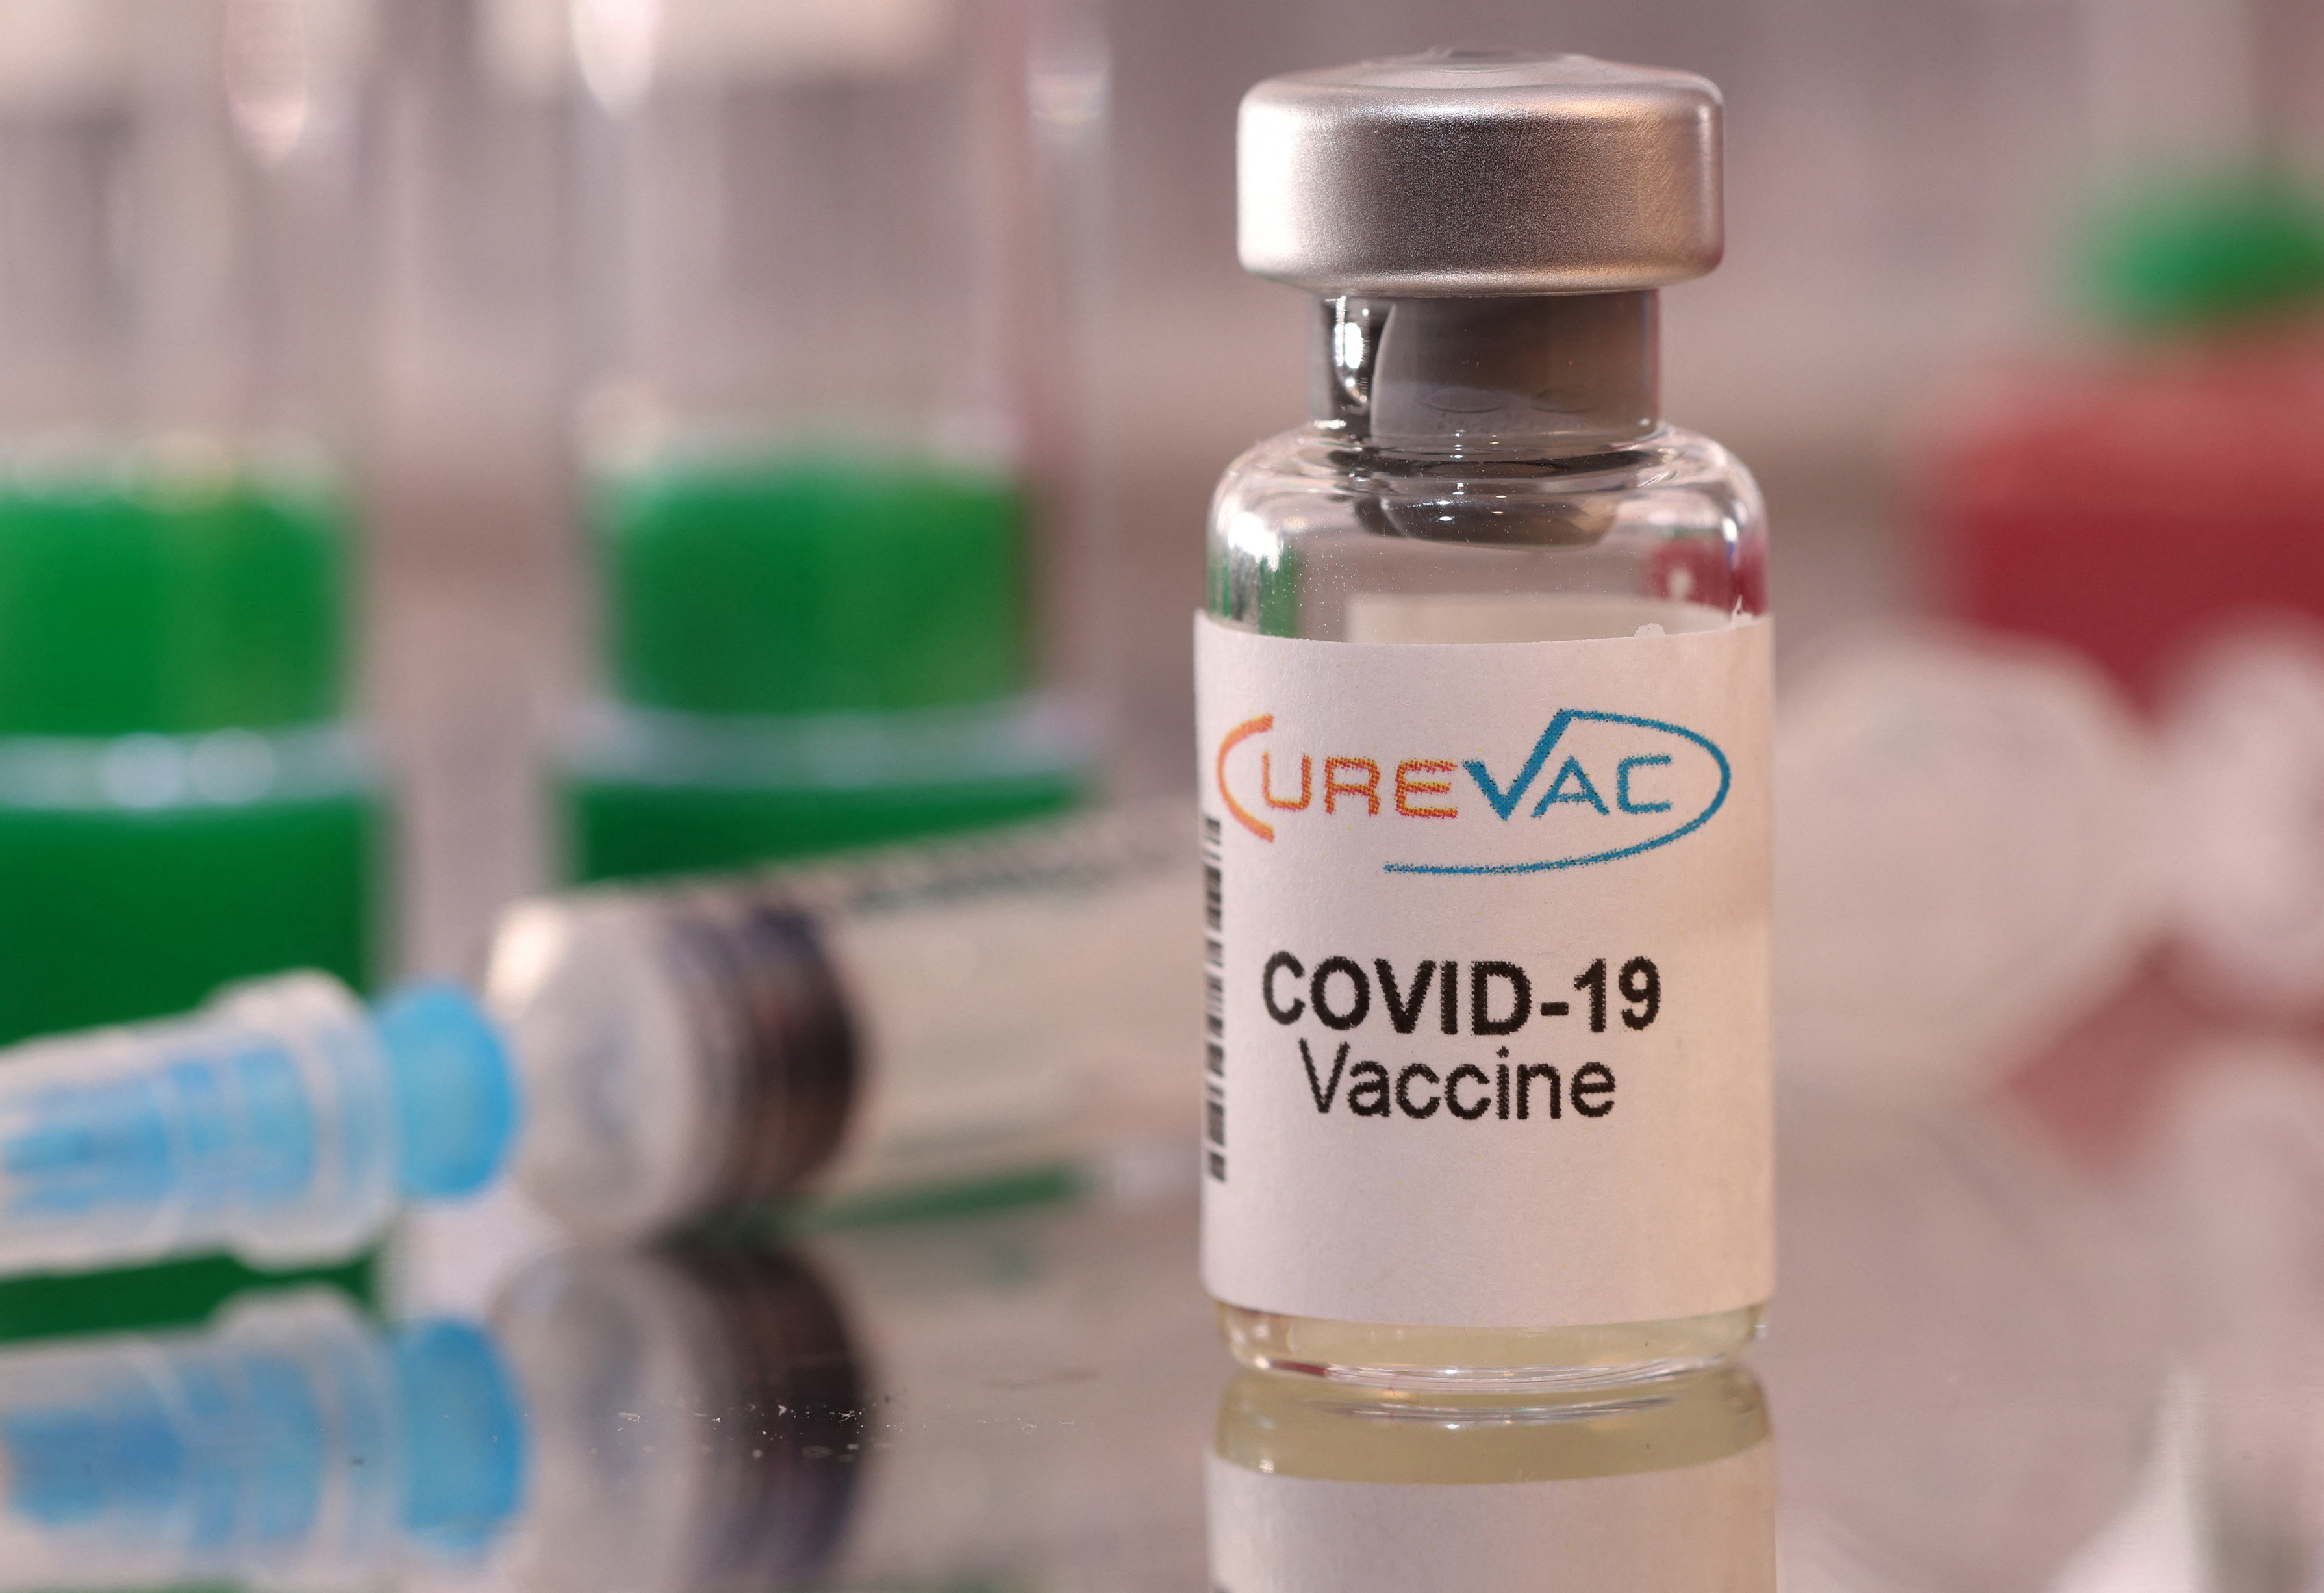 CureVac says COVID vaccine produced immune response in early-stage trial